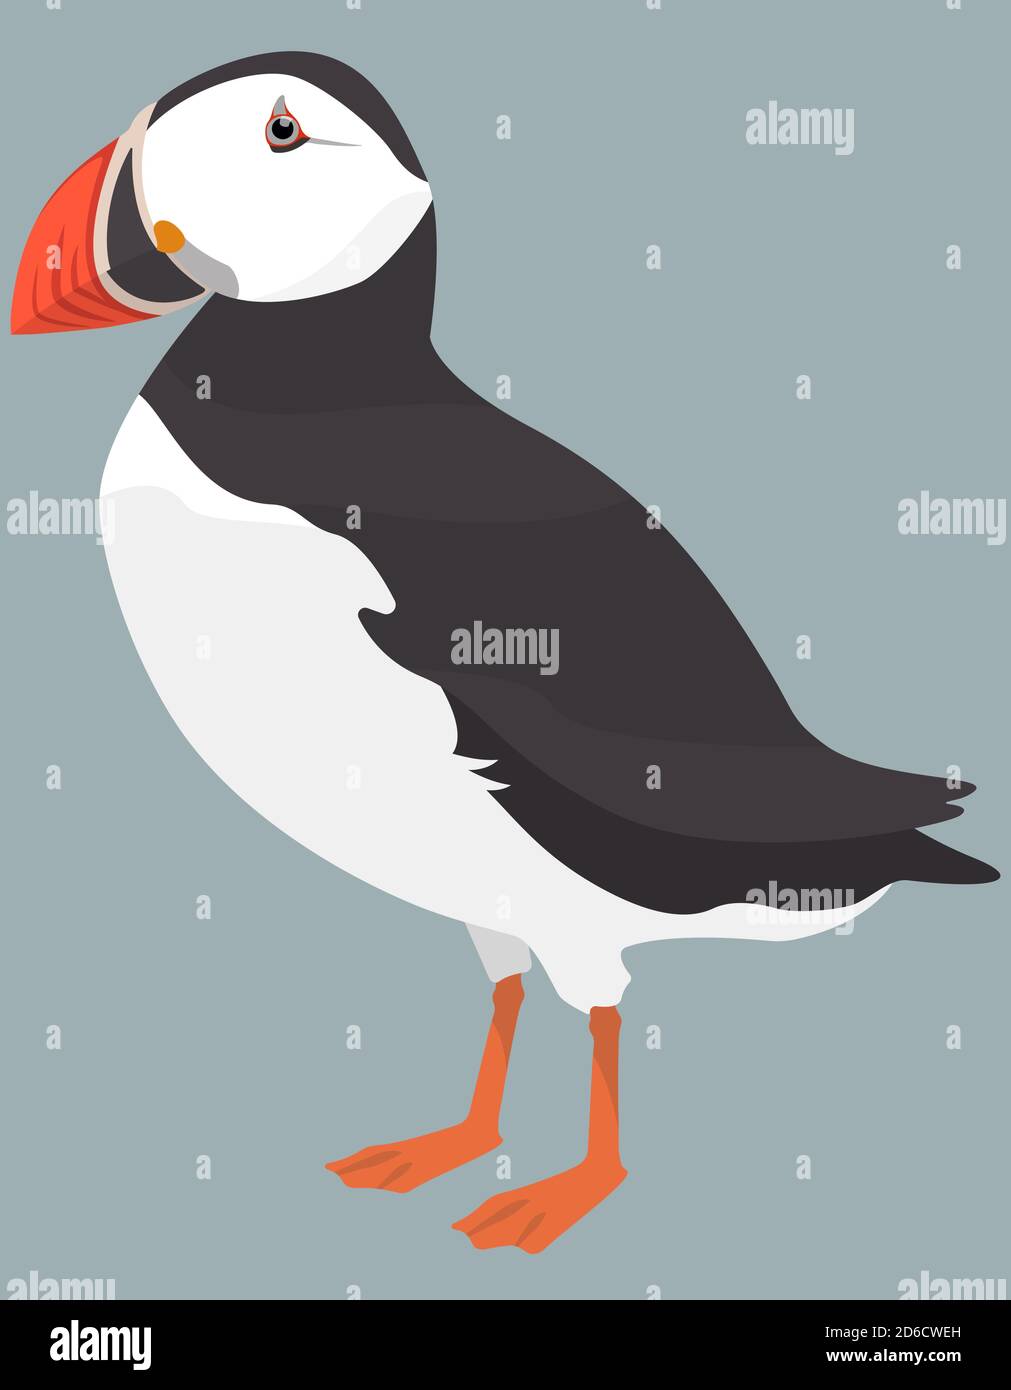 Atlantic puffin side view. Northern bird in cartoon style. Stock Vector